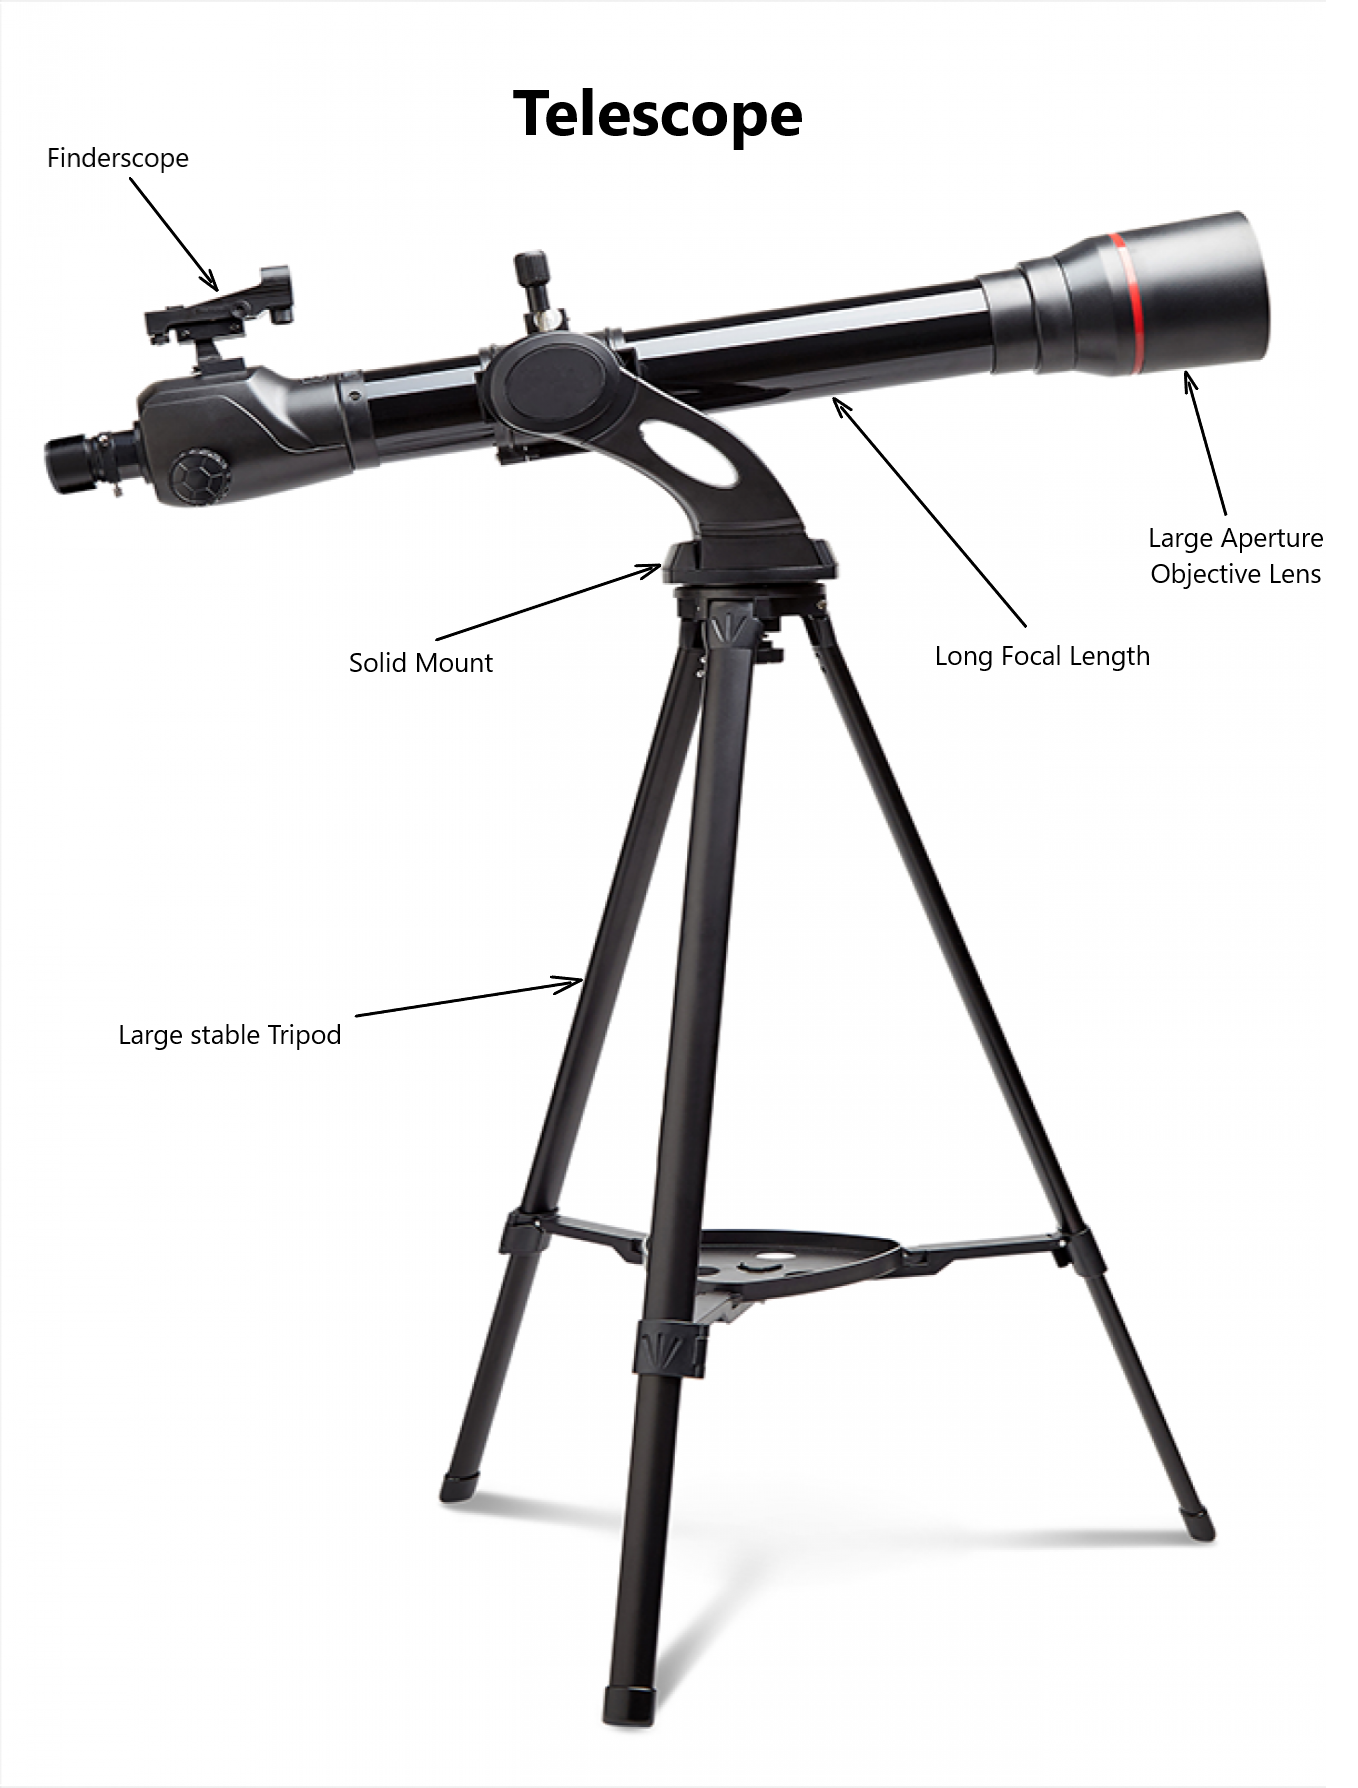 Finder Scope | How to Use a Telescope | Part 1